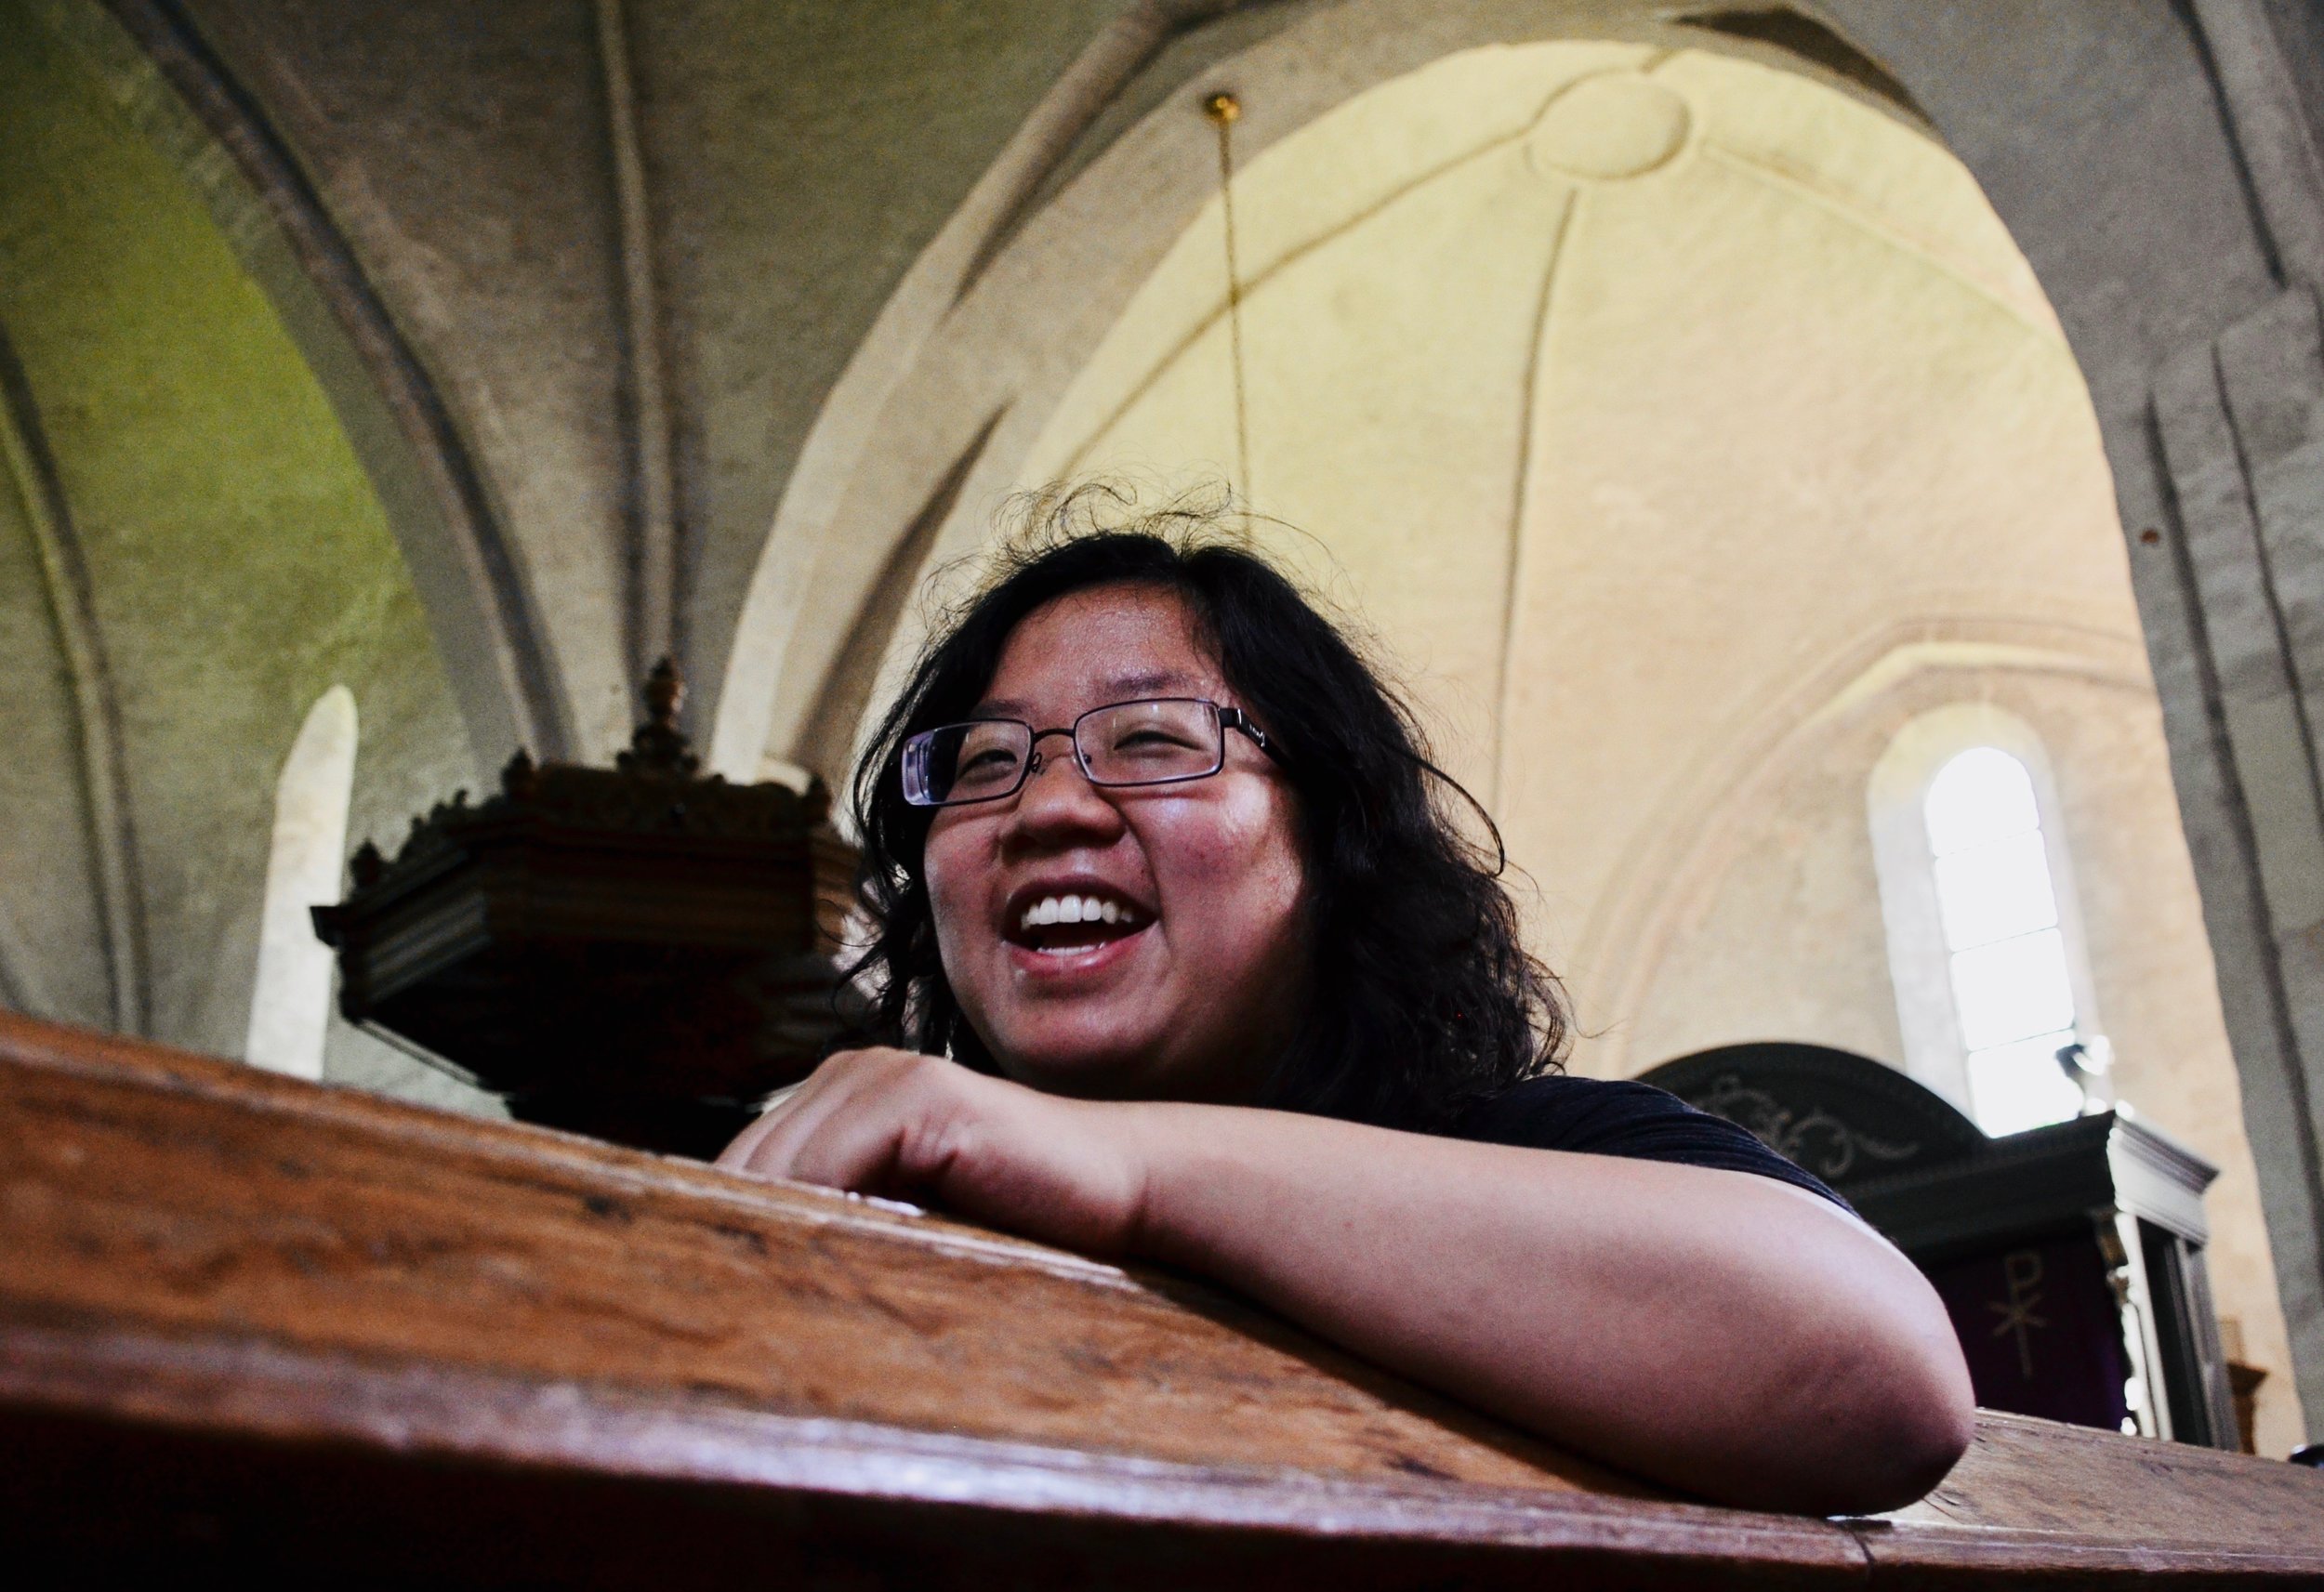  Jennifer Hsiao is all smiles listening to the 1733 Hinsz organ, Leens, Holland. 